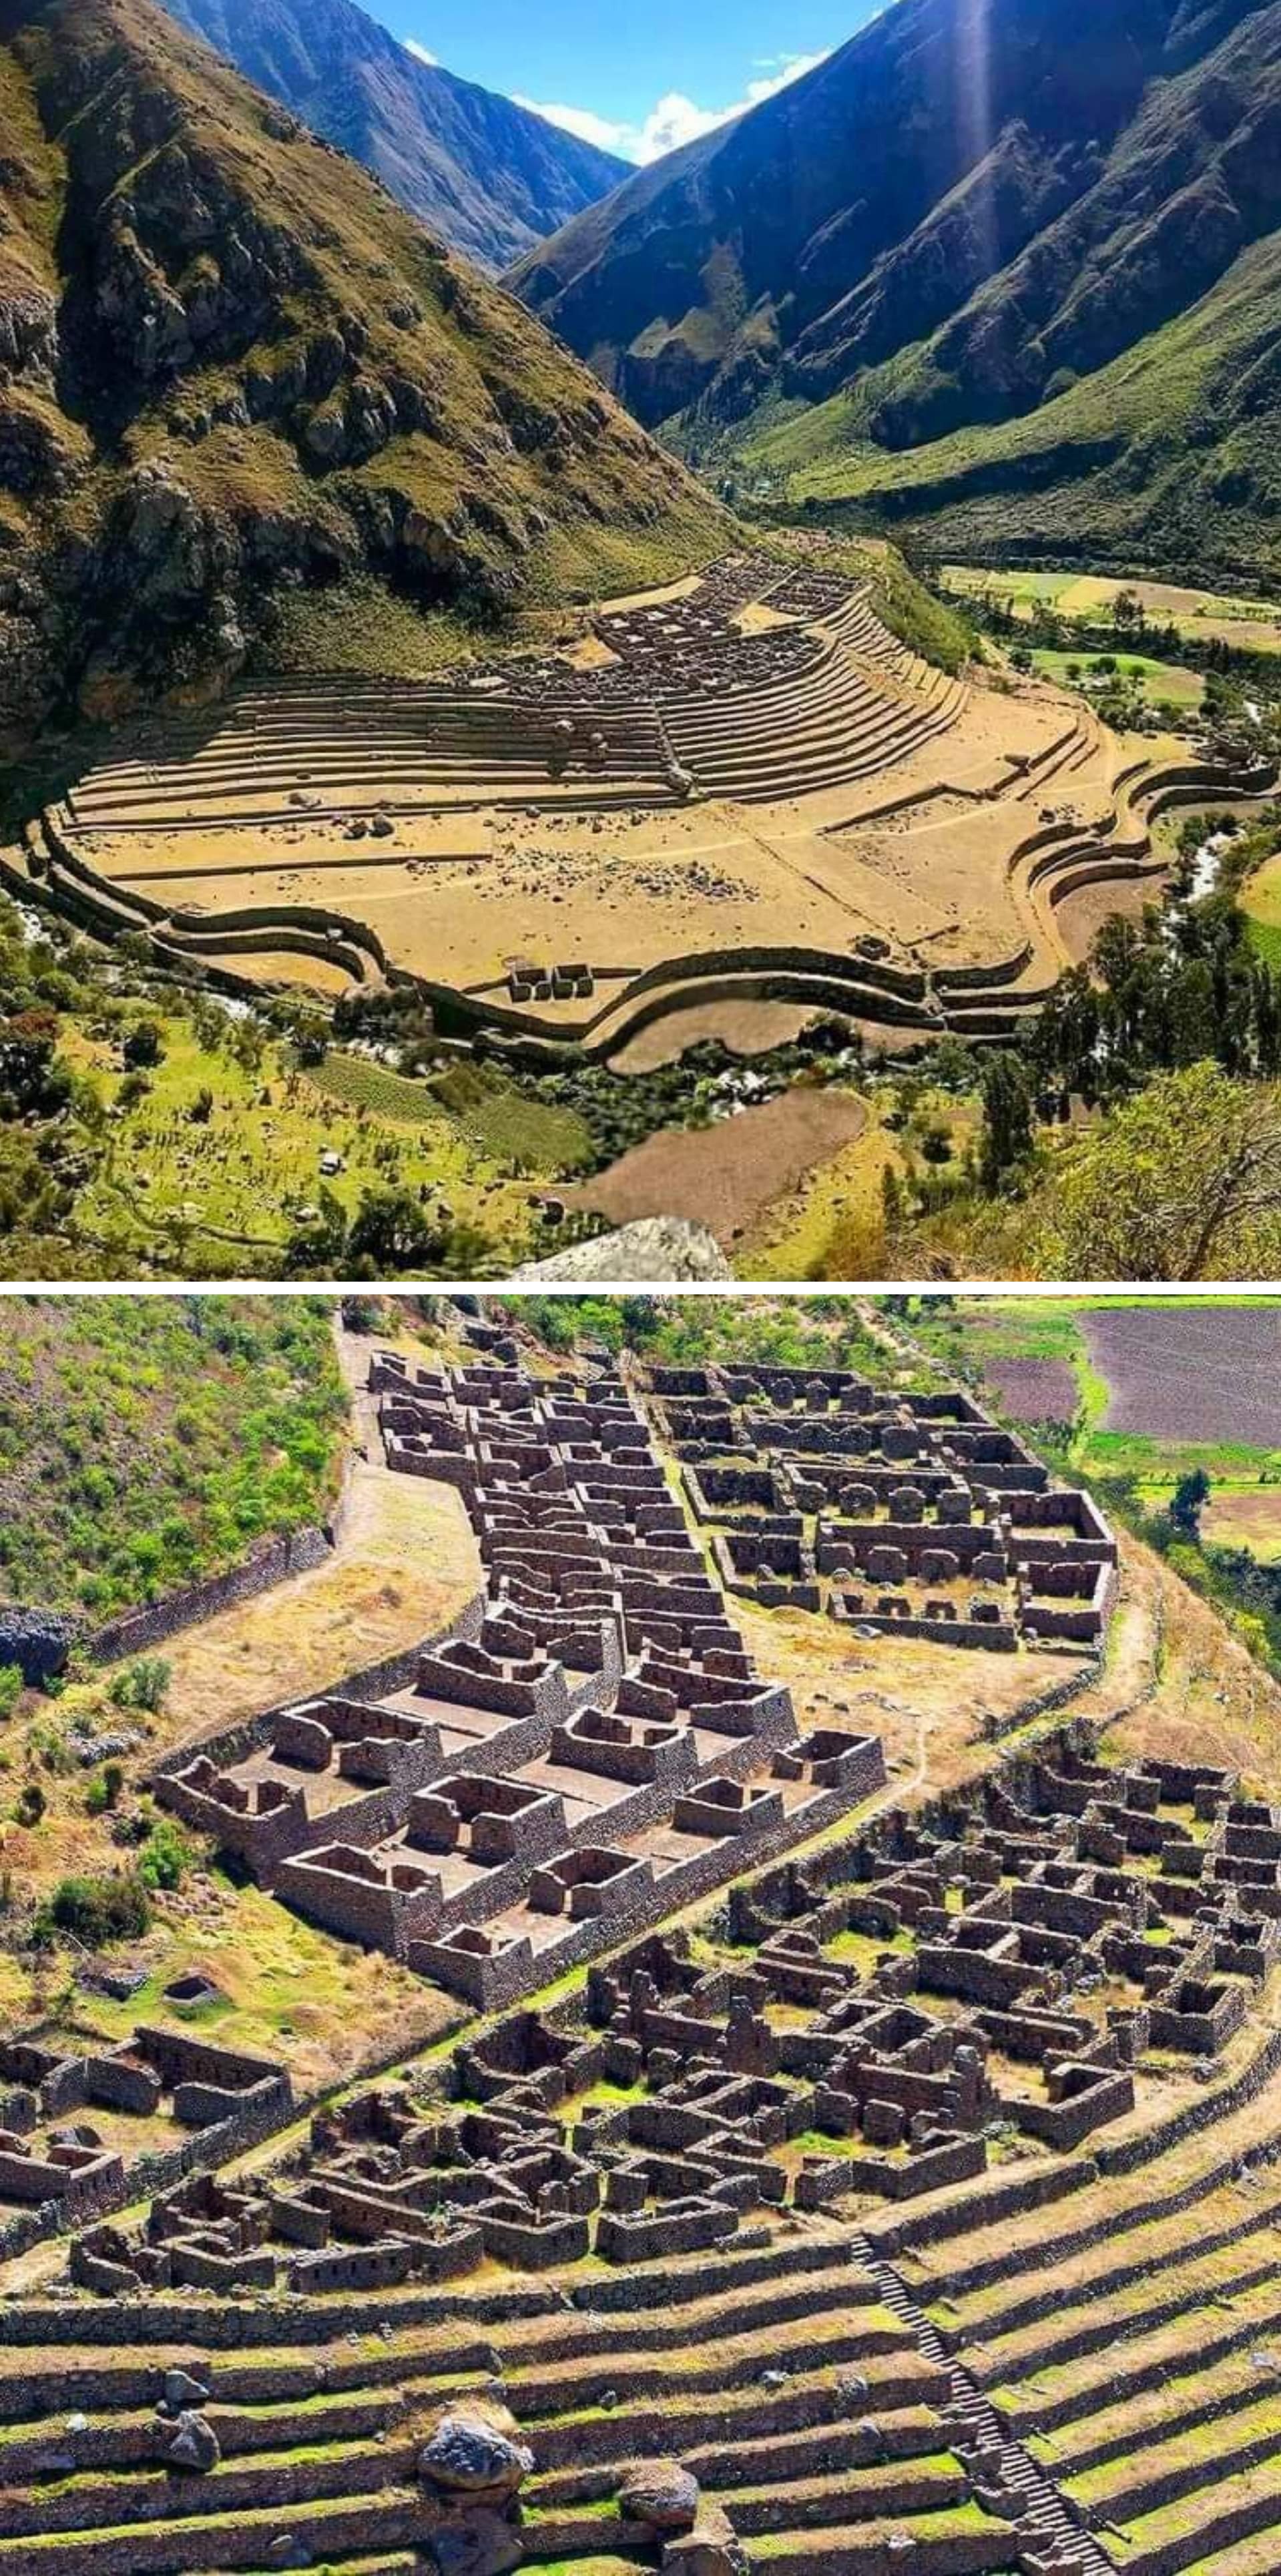 Patallacta is a large Inca site, in Peru, built atop stepped agricultural terraces surrounding a rising hillside.jpg